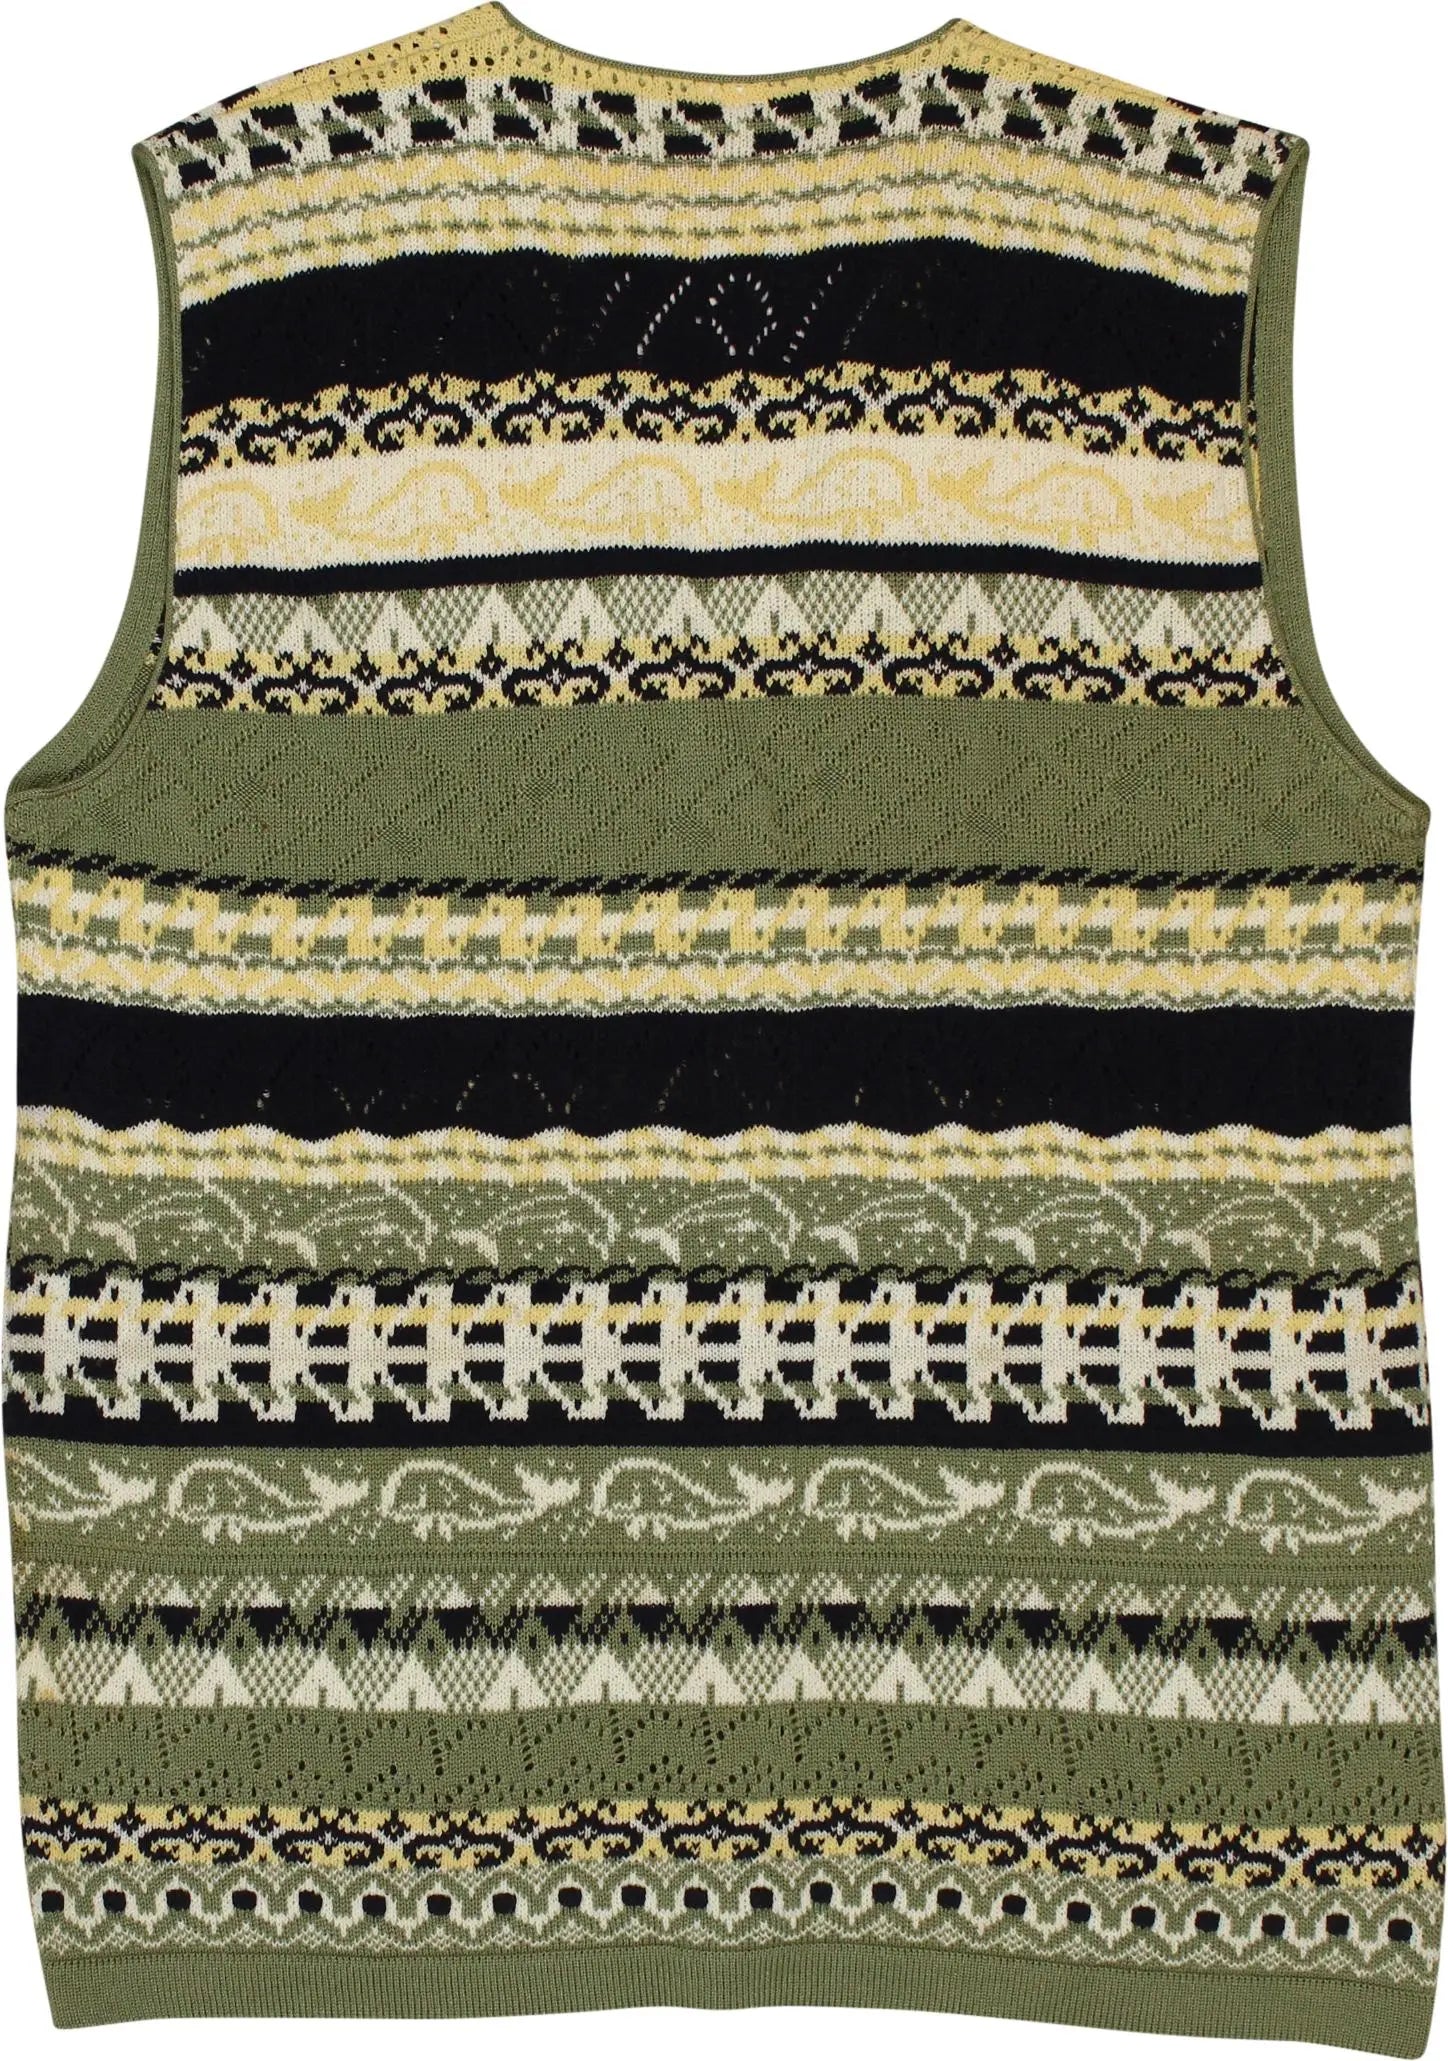 Kstell Fashion - 90s Knitted Vest- ThriftTale.com - Vintage and second handclothing